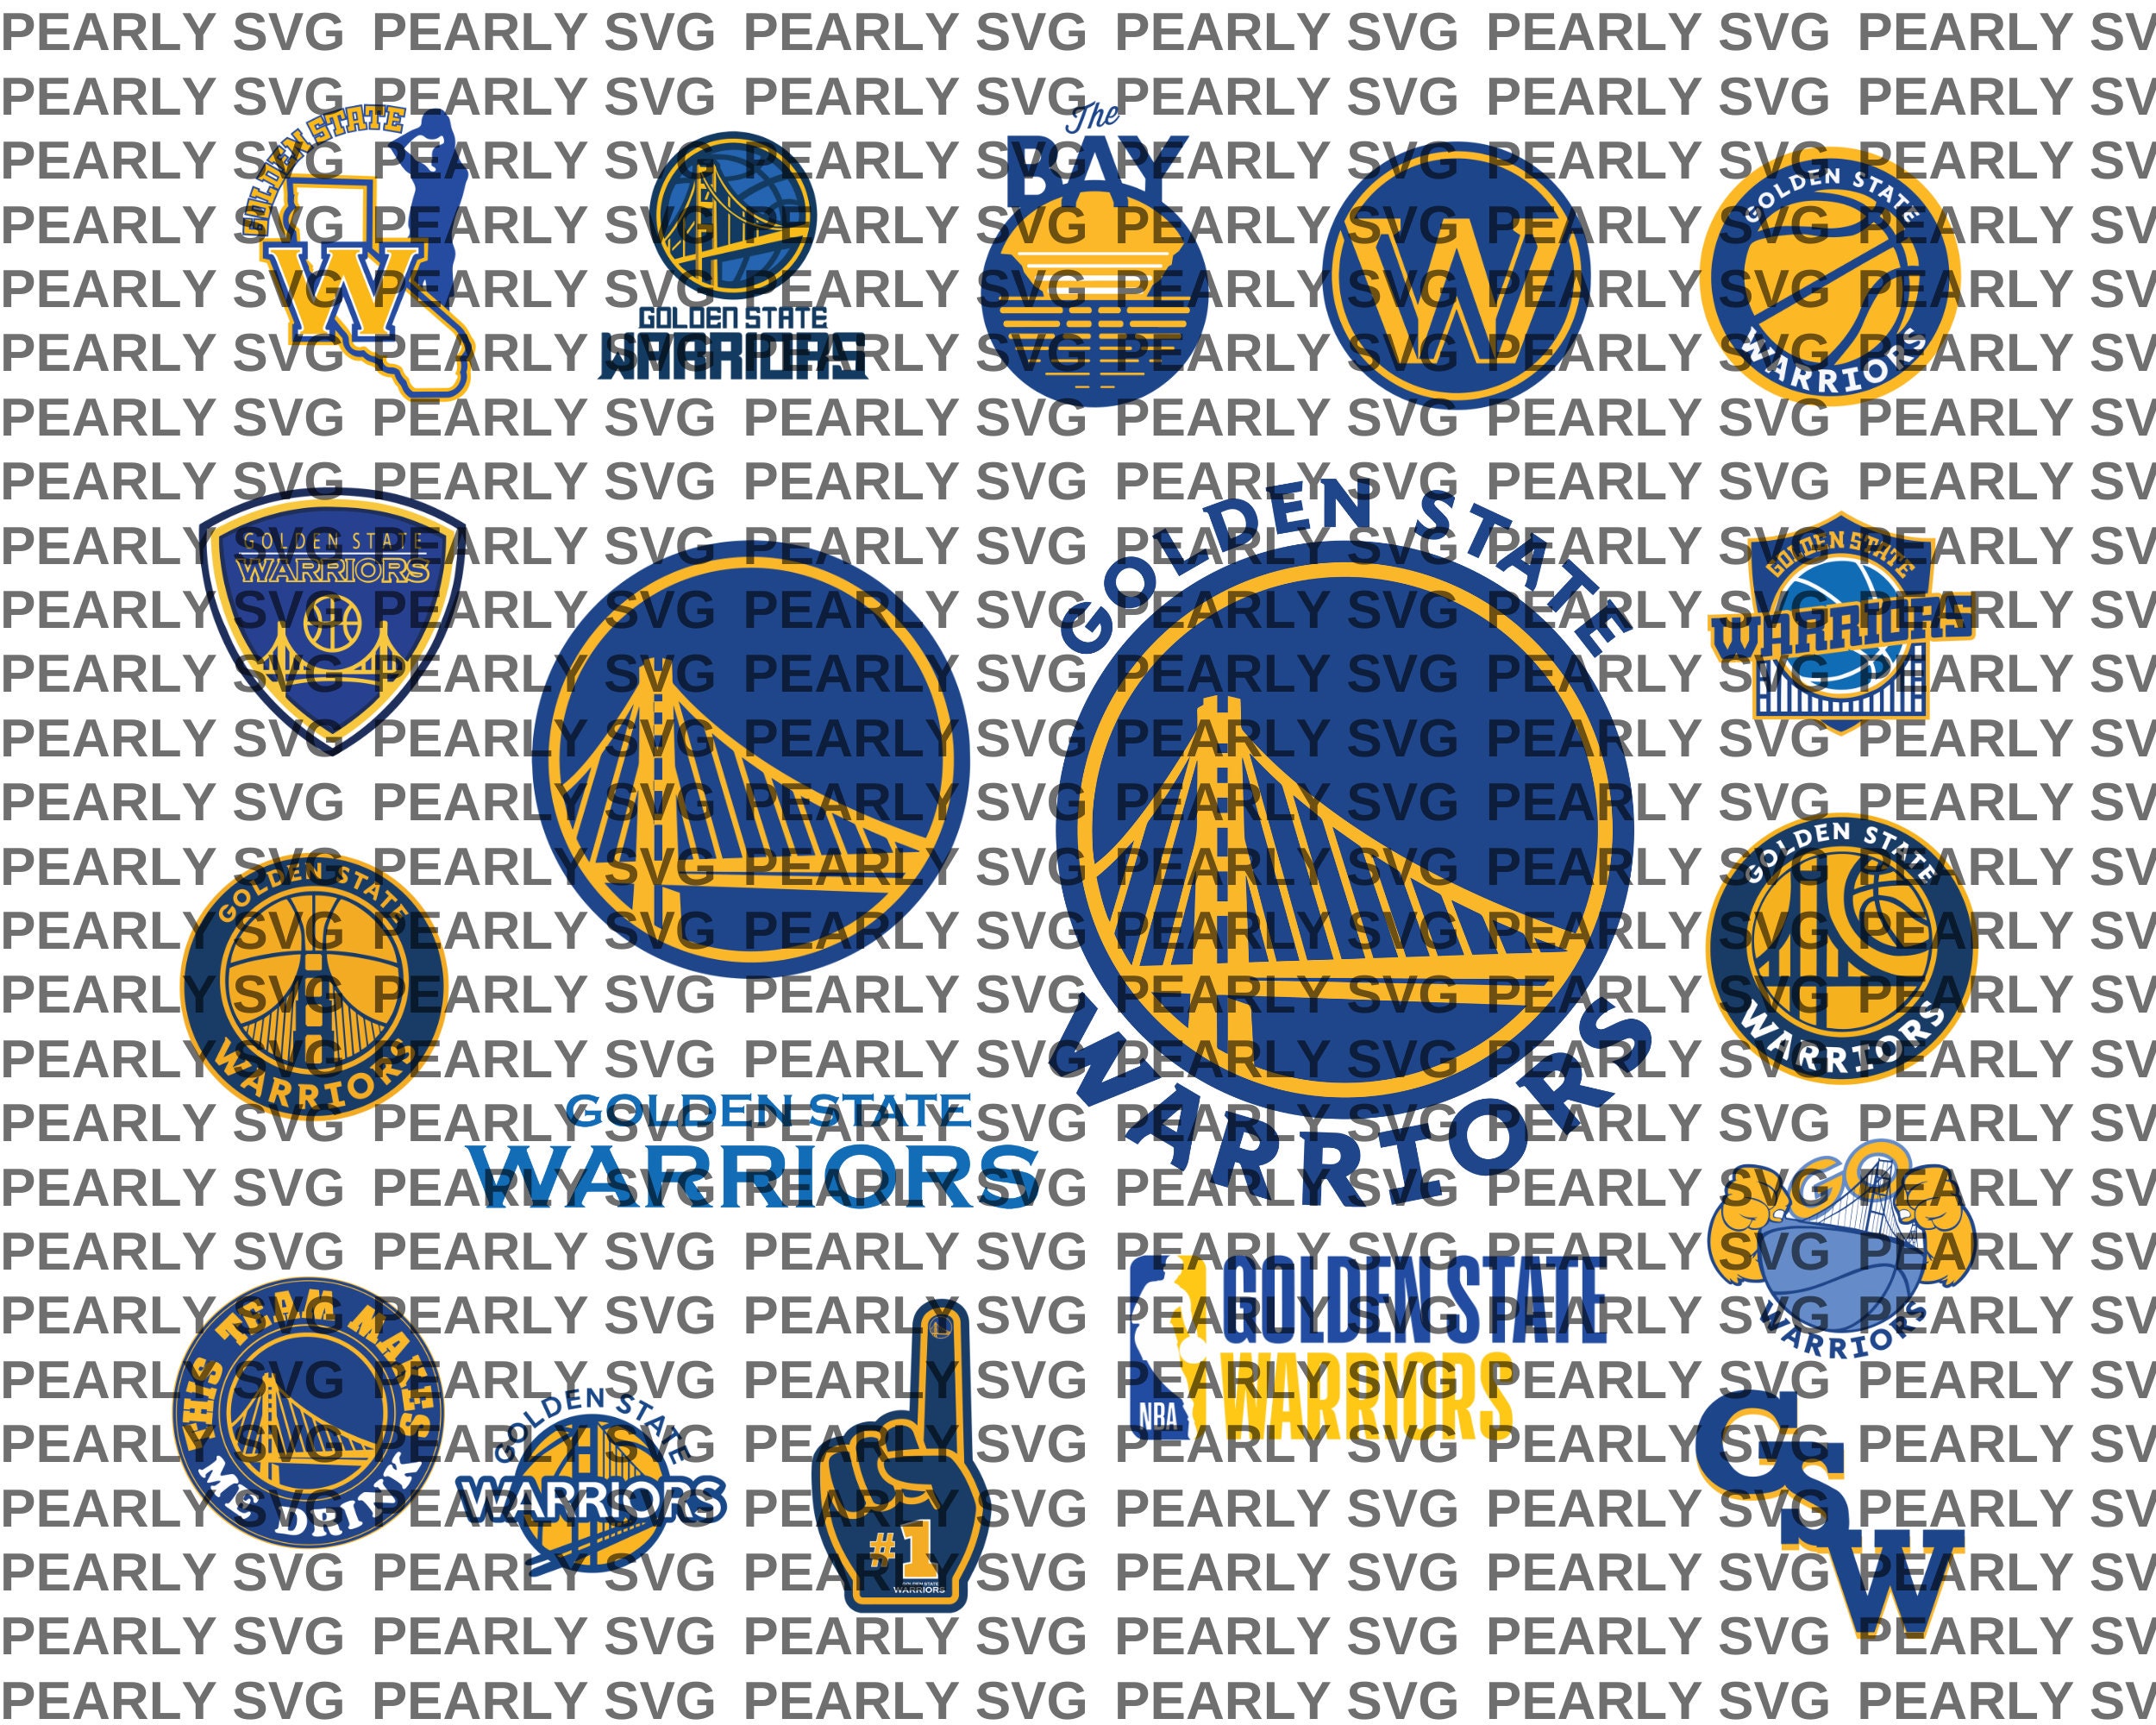 Golden State Warriors 2021/22 NBA Champions Round Wood Sign - 14 – Sports  Fanz